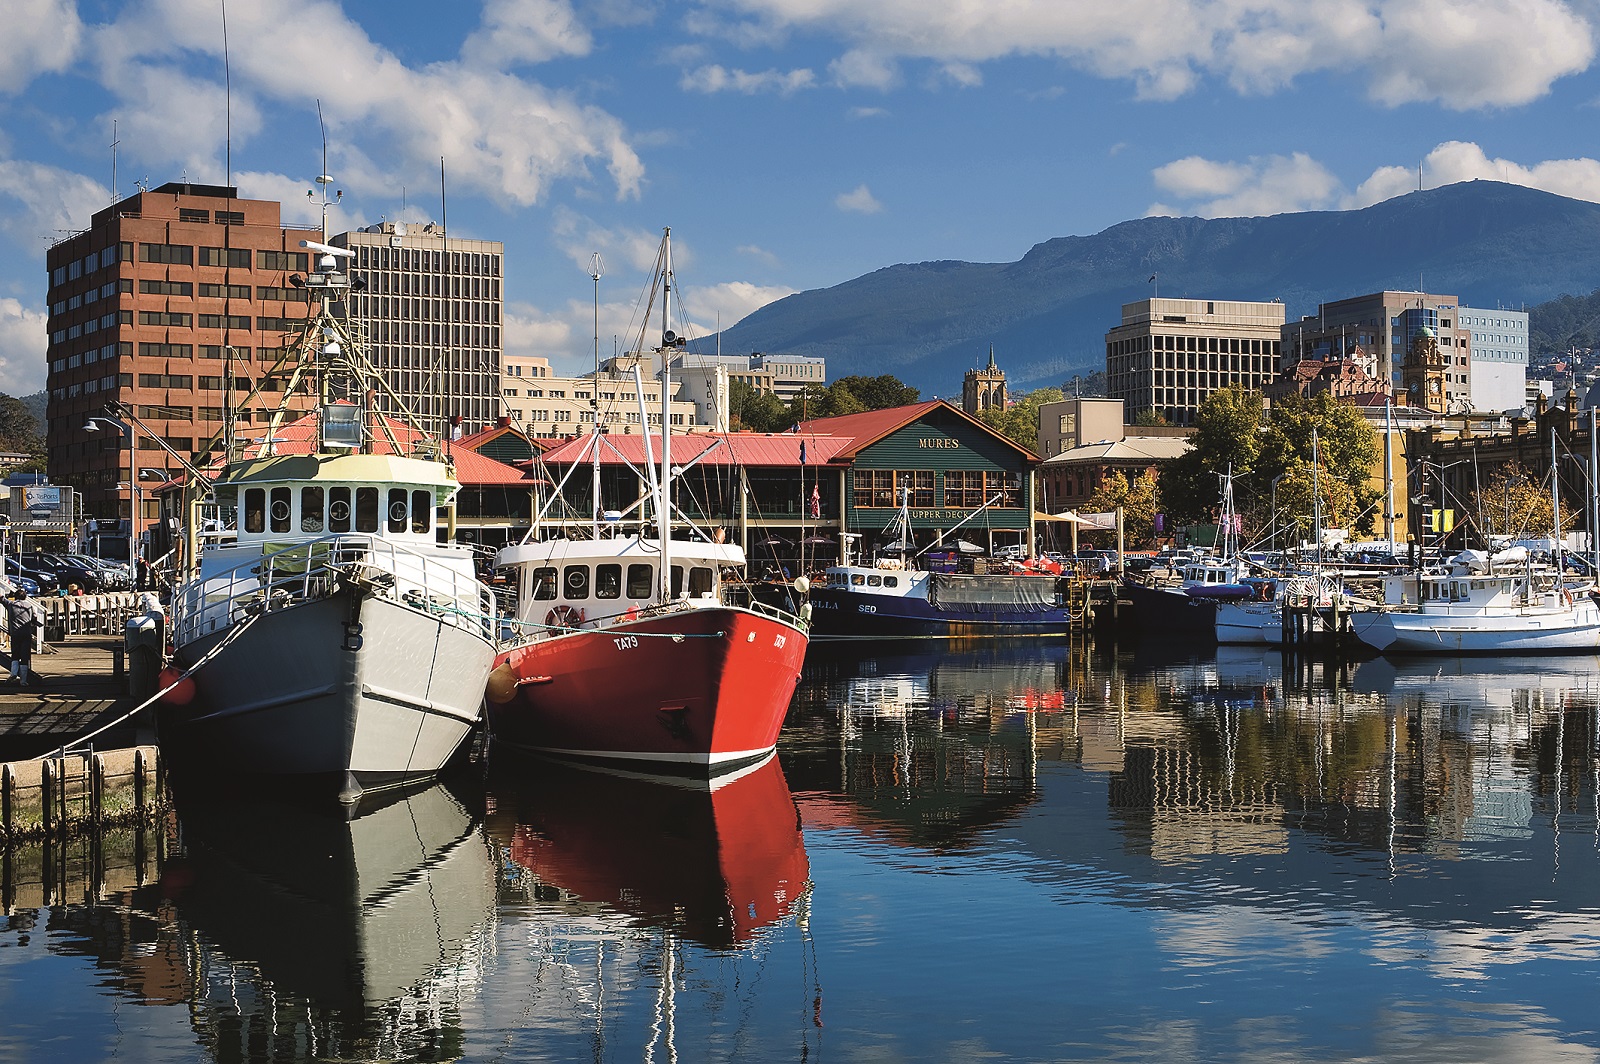 Boats moored at Victoria Dock, Mt. Wellington in background, Hobart, Tasmania, TAS, Australia. (Photo by: Universal Images Group via Getty Images)